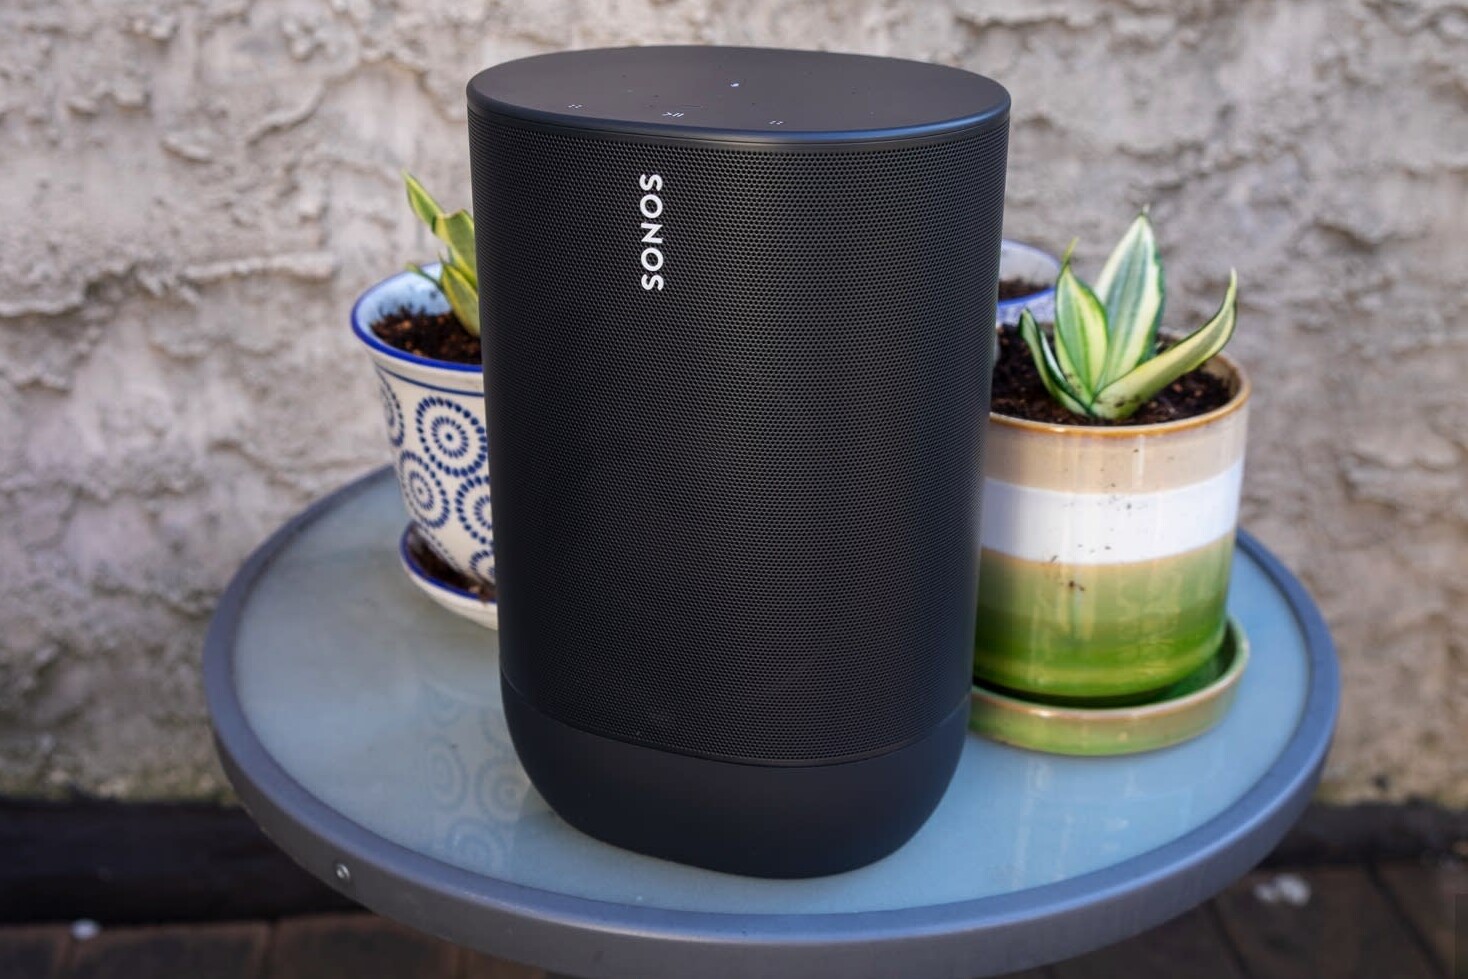 Can You Use Just One Sonos Speaker?